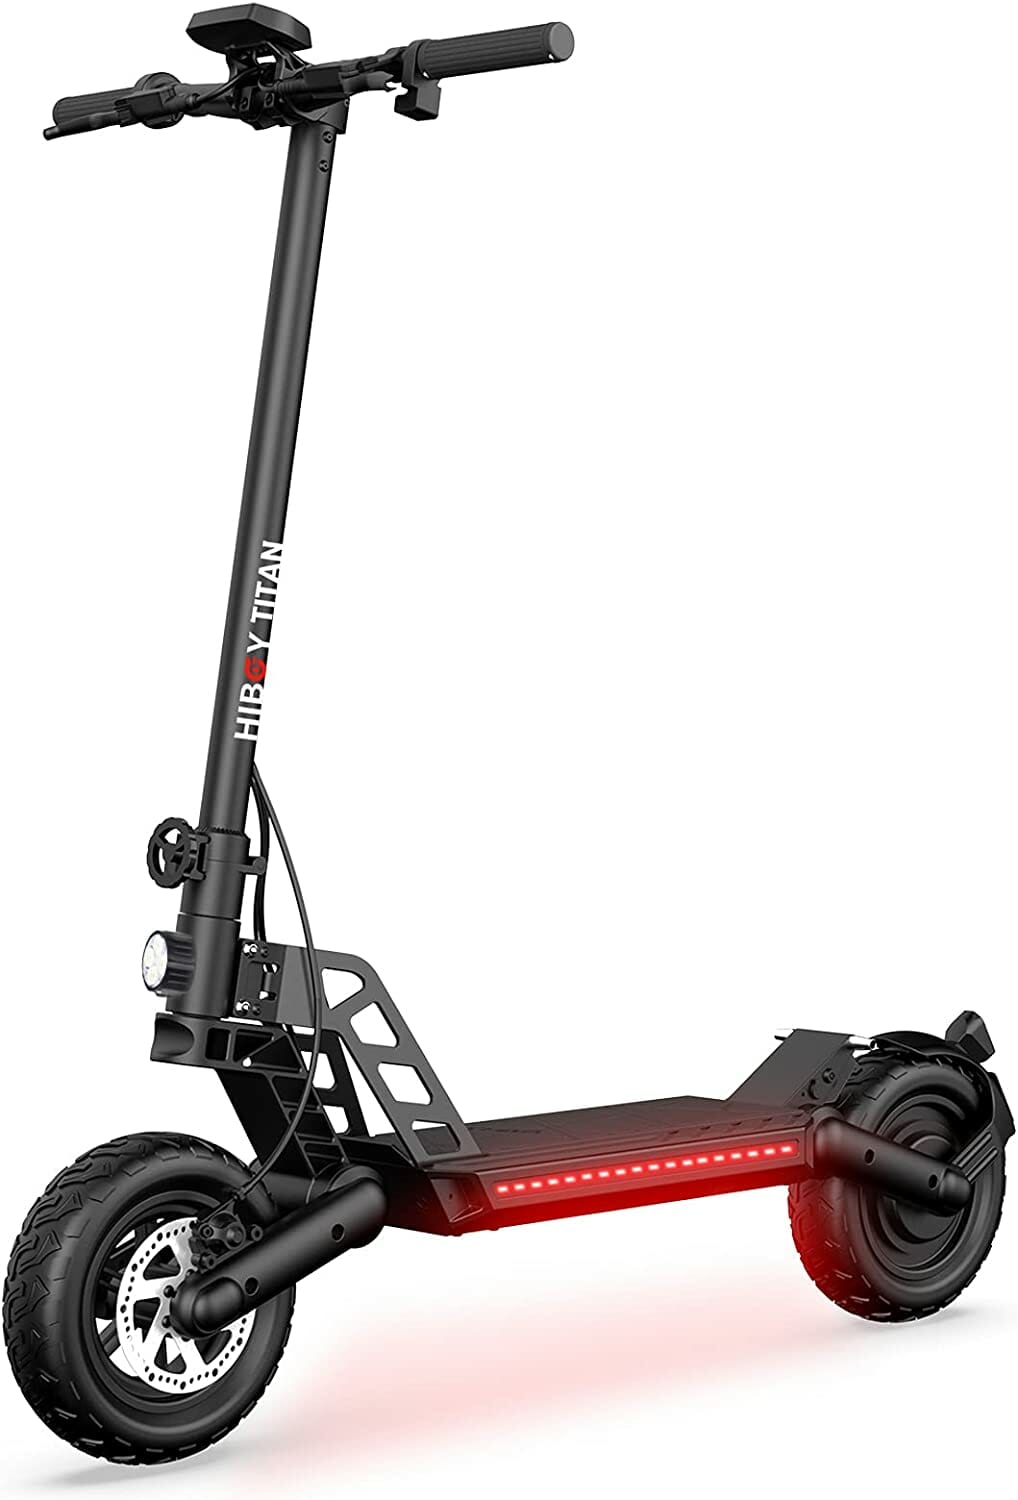 1. Hiboy Titan Electric Scooter 800W Electric Scooter